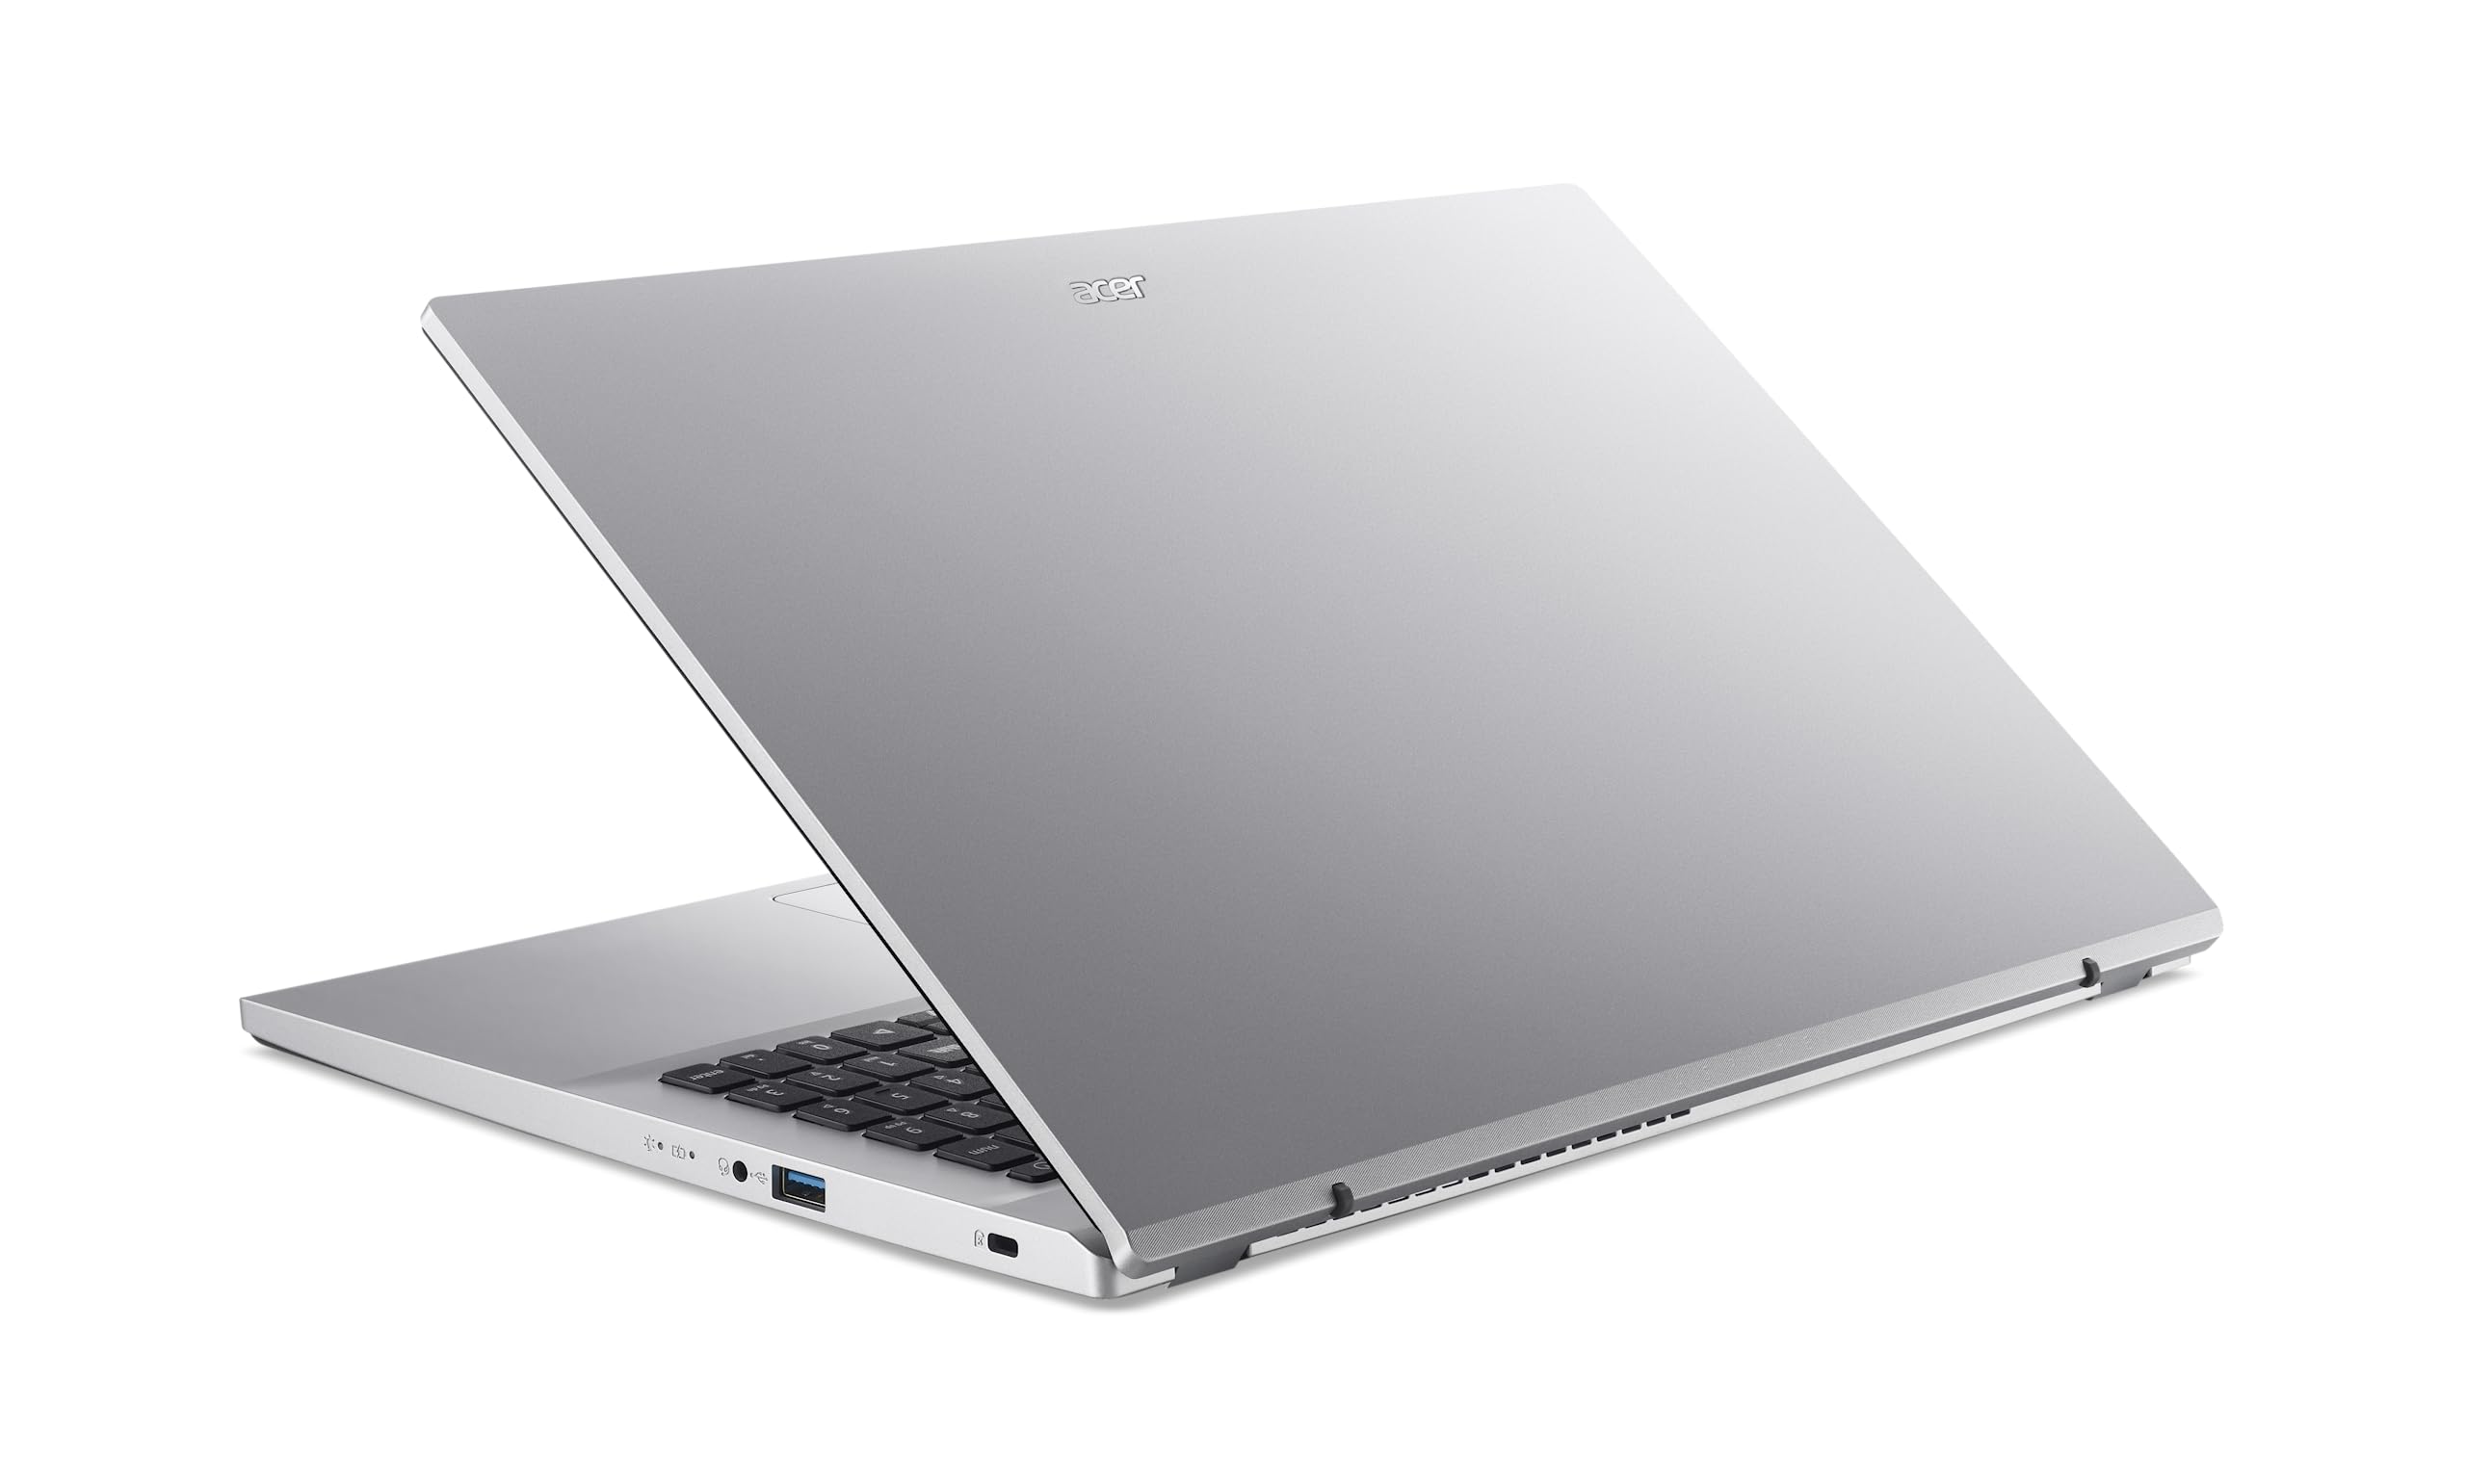 Acer Aspire 3 A315 Notebook with 11th Gen Intel Core i7-1165G7 Quad Core Upto 4.70GHz/16GB DDR4 RAM/512GB SSD Storage/Intel Iris XE Graphics/15.6" FHD ComfyView Display/Win 11/WiFi-6/Pure Silver